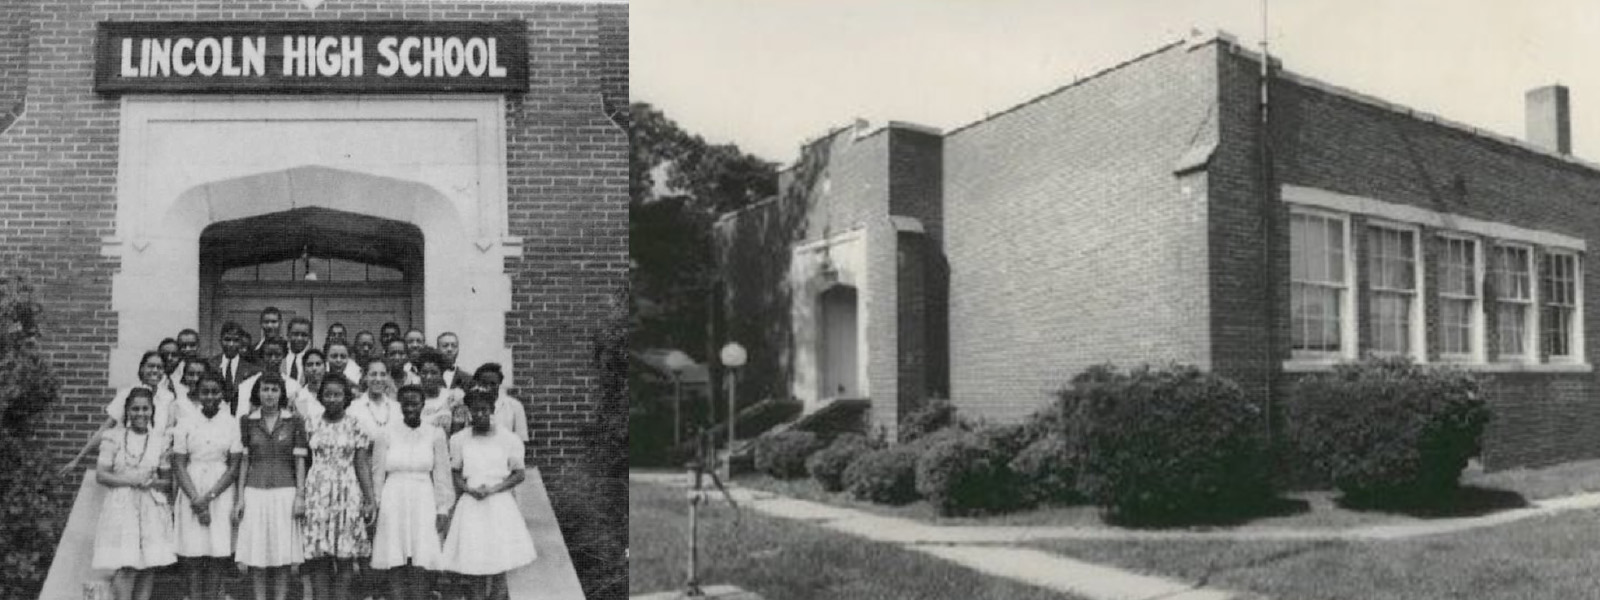 Two images: Students at entrance of Lincoln High School and an exterior shot of the Lincoln High School building